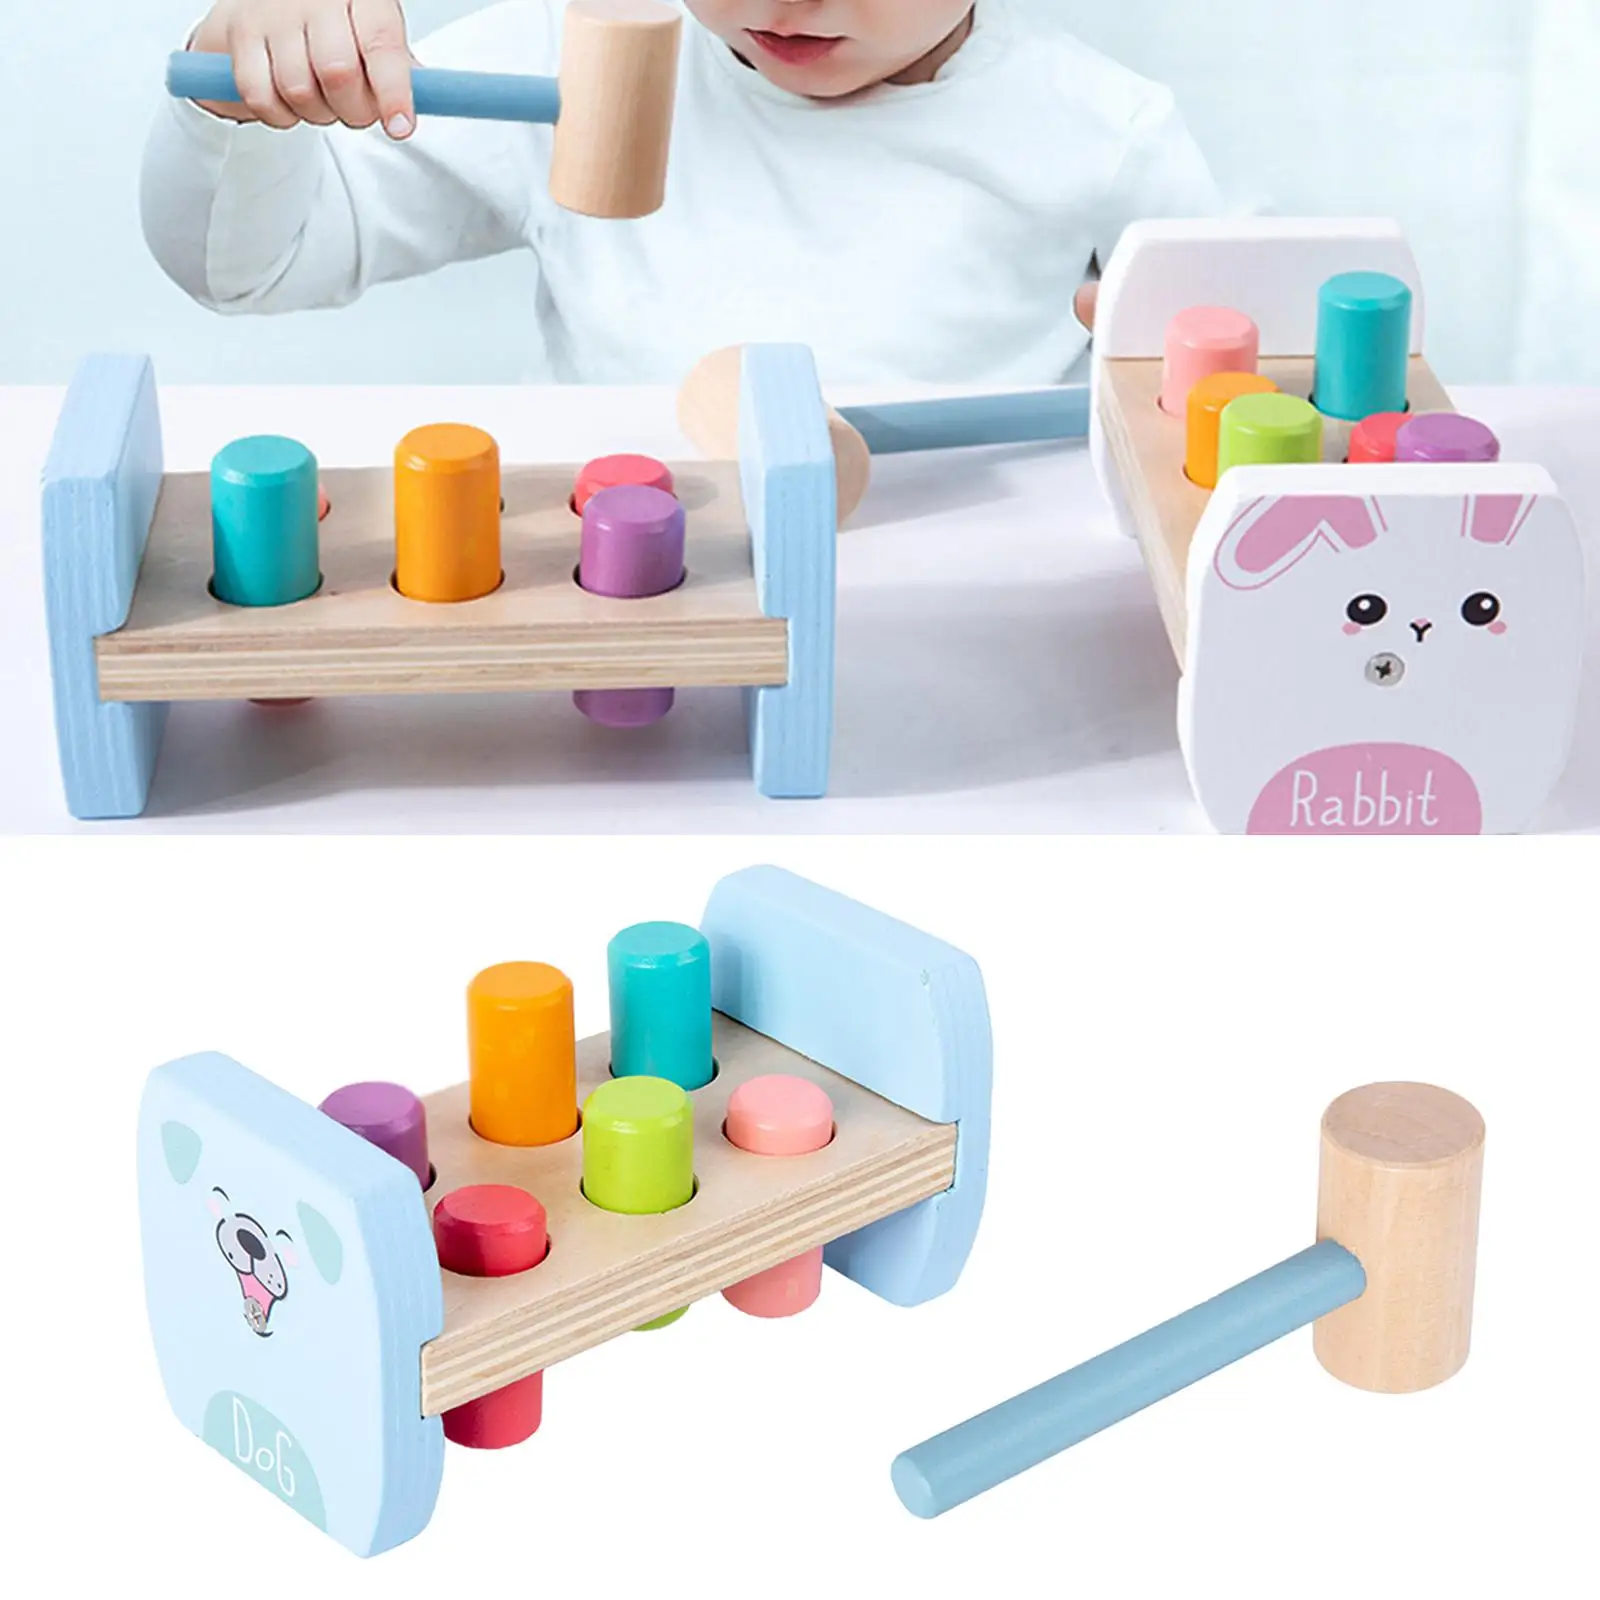 Wooden Pounding Educational Activity Toys for Ages 3+ Kids